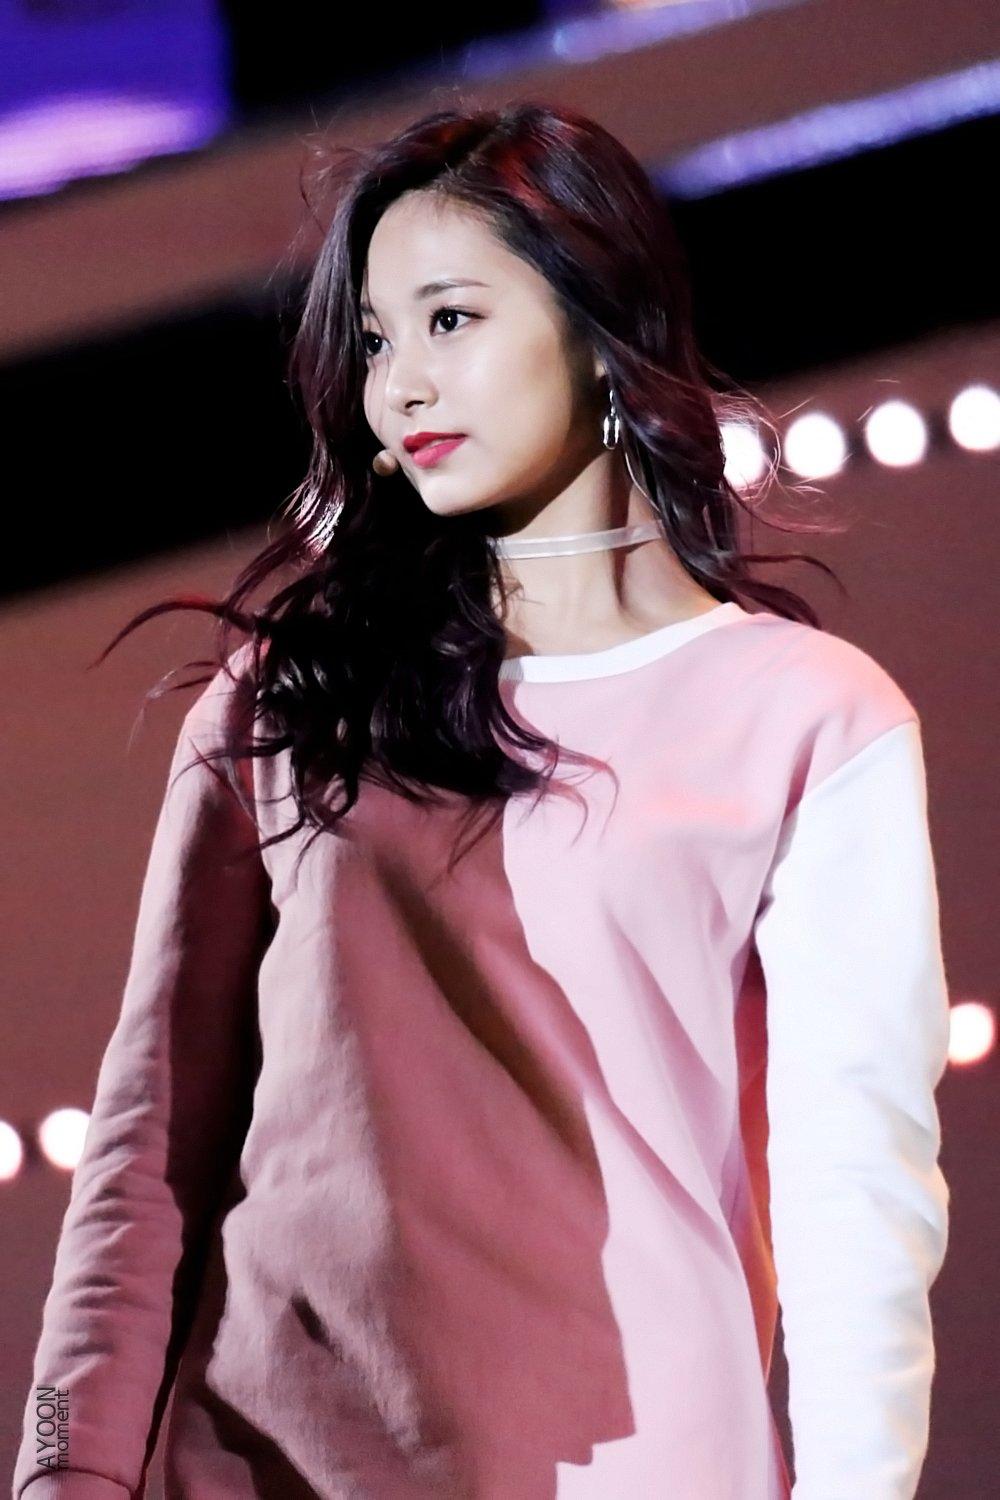 Tzuyu Android IPhone Wallpaper KPOP Image